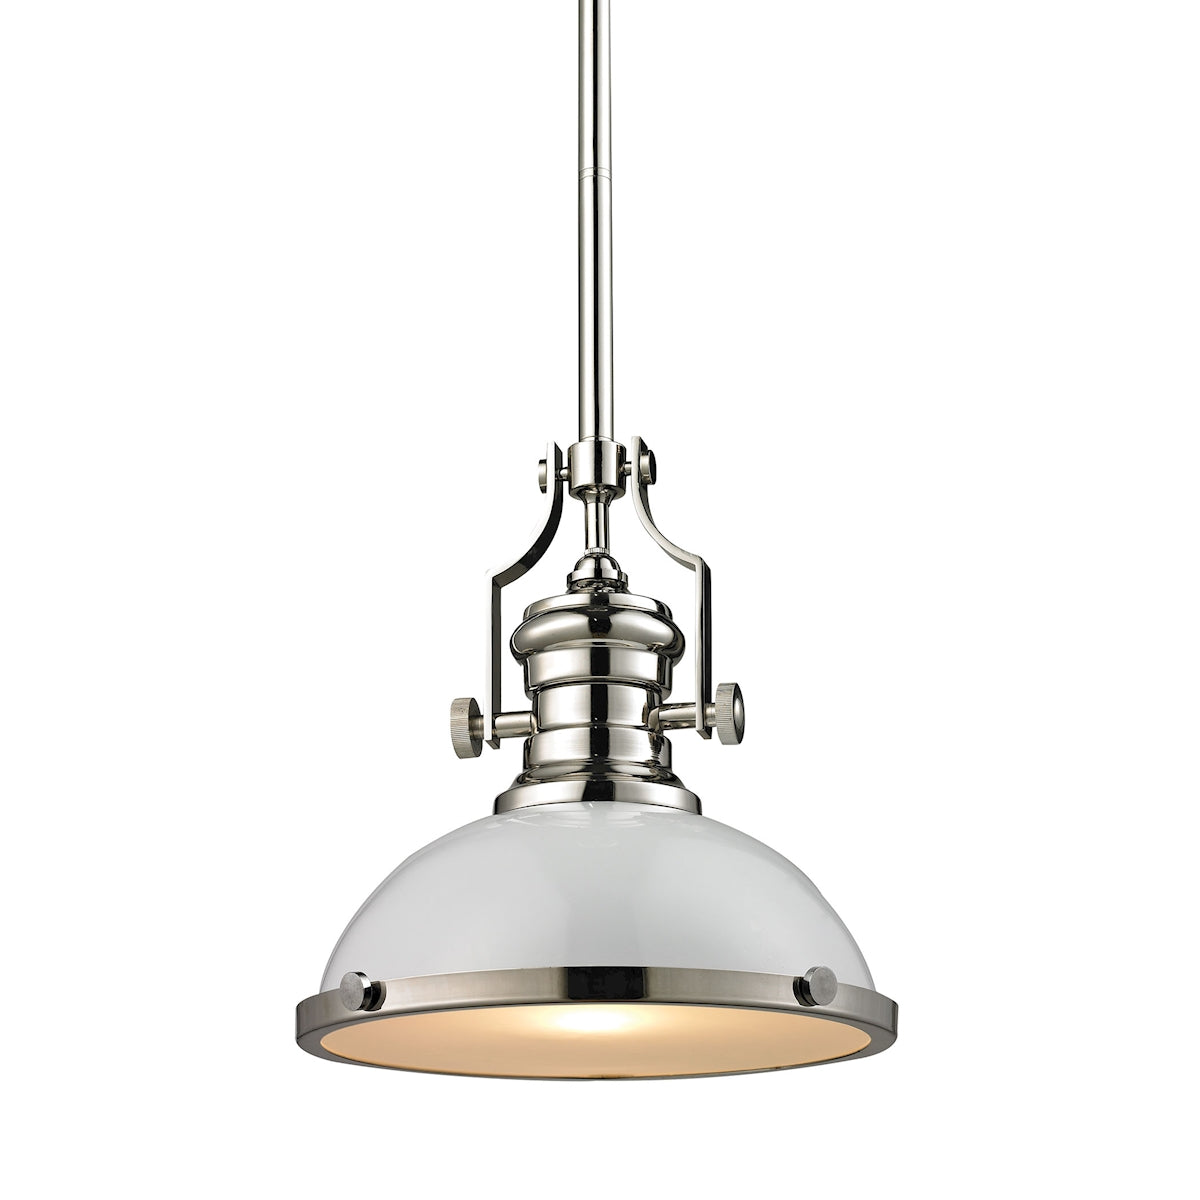 ELK Lighting 66515-1 Chadwick 1-Light Pendant in Polished Nickel with Gloss White Shade